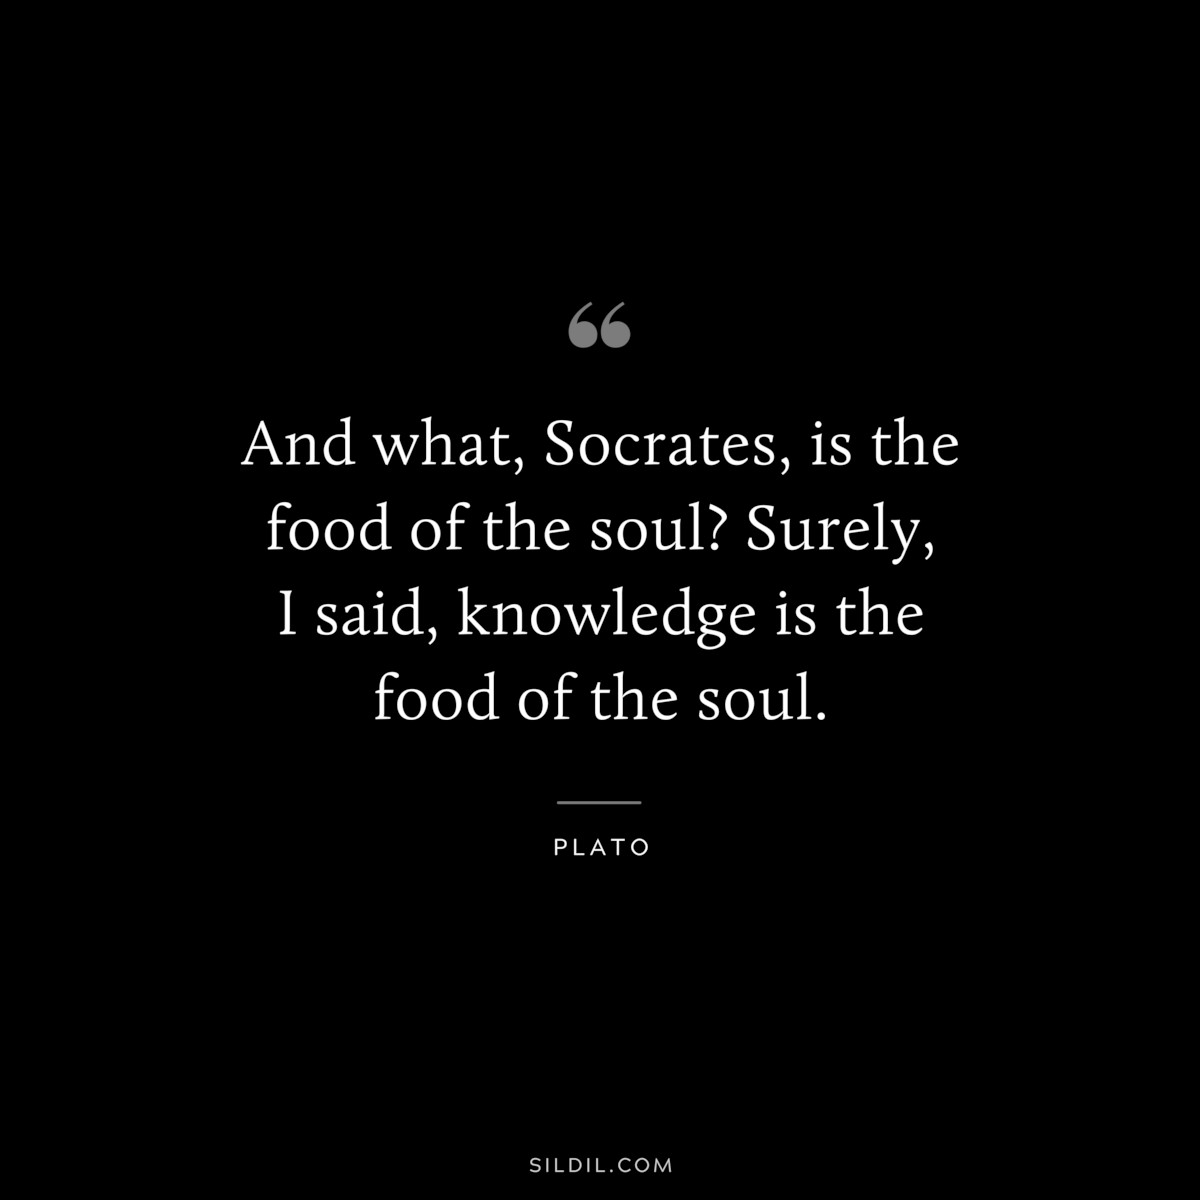 And what, Socrates, is the food of the soul? Surely, I said, knowledge is the food of the soul. ― Plato